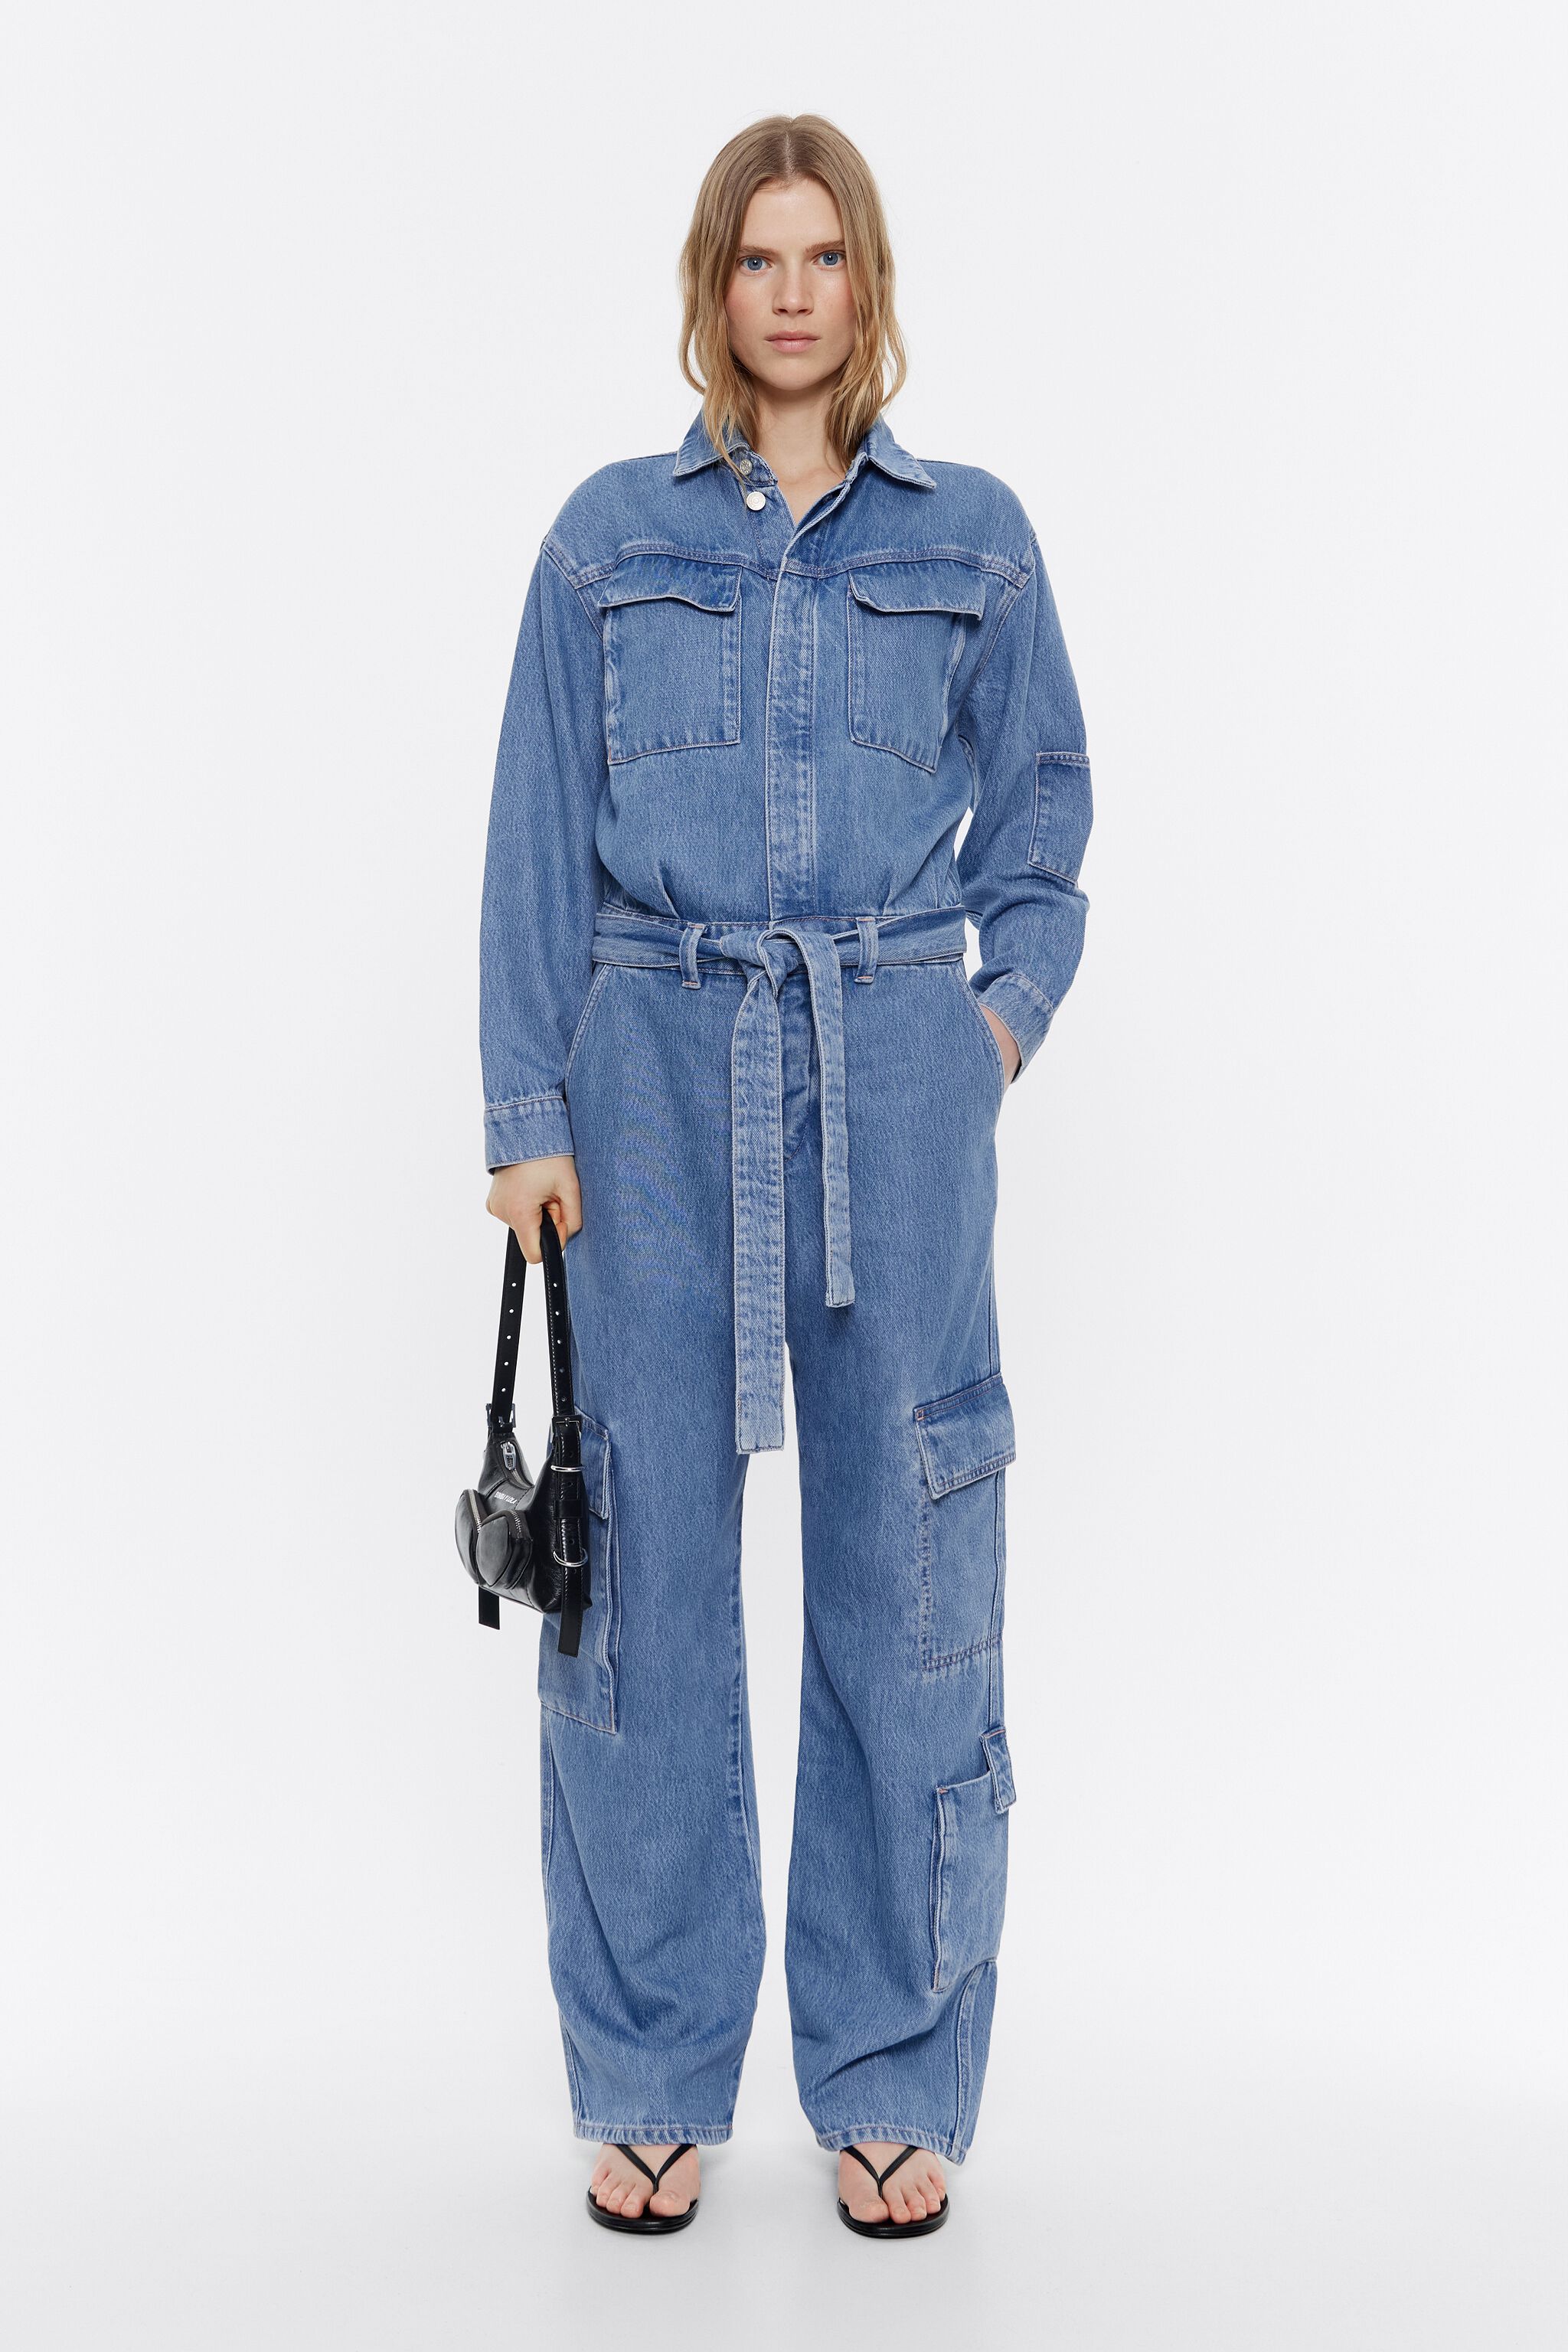 Paige Carly Denim Jumpsuit | Anthropologie Japan - Women's Clothing,  Accessories & Home